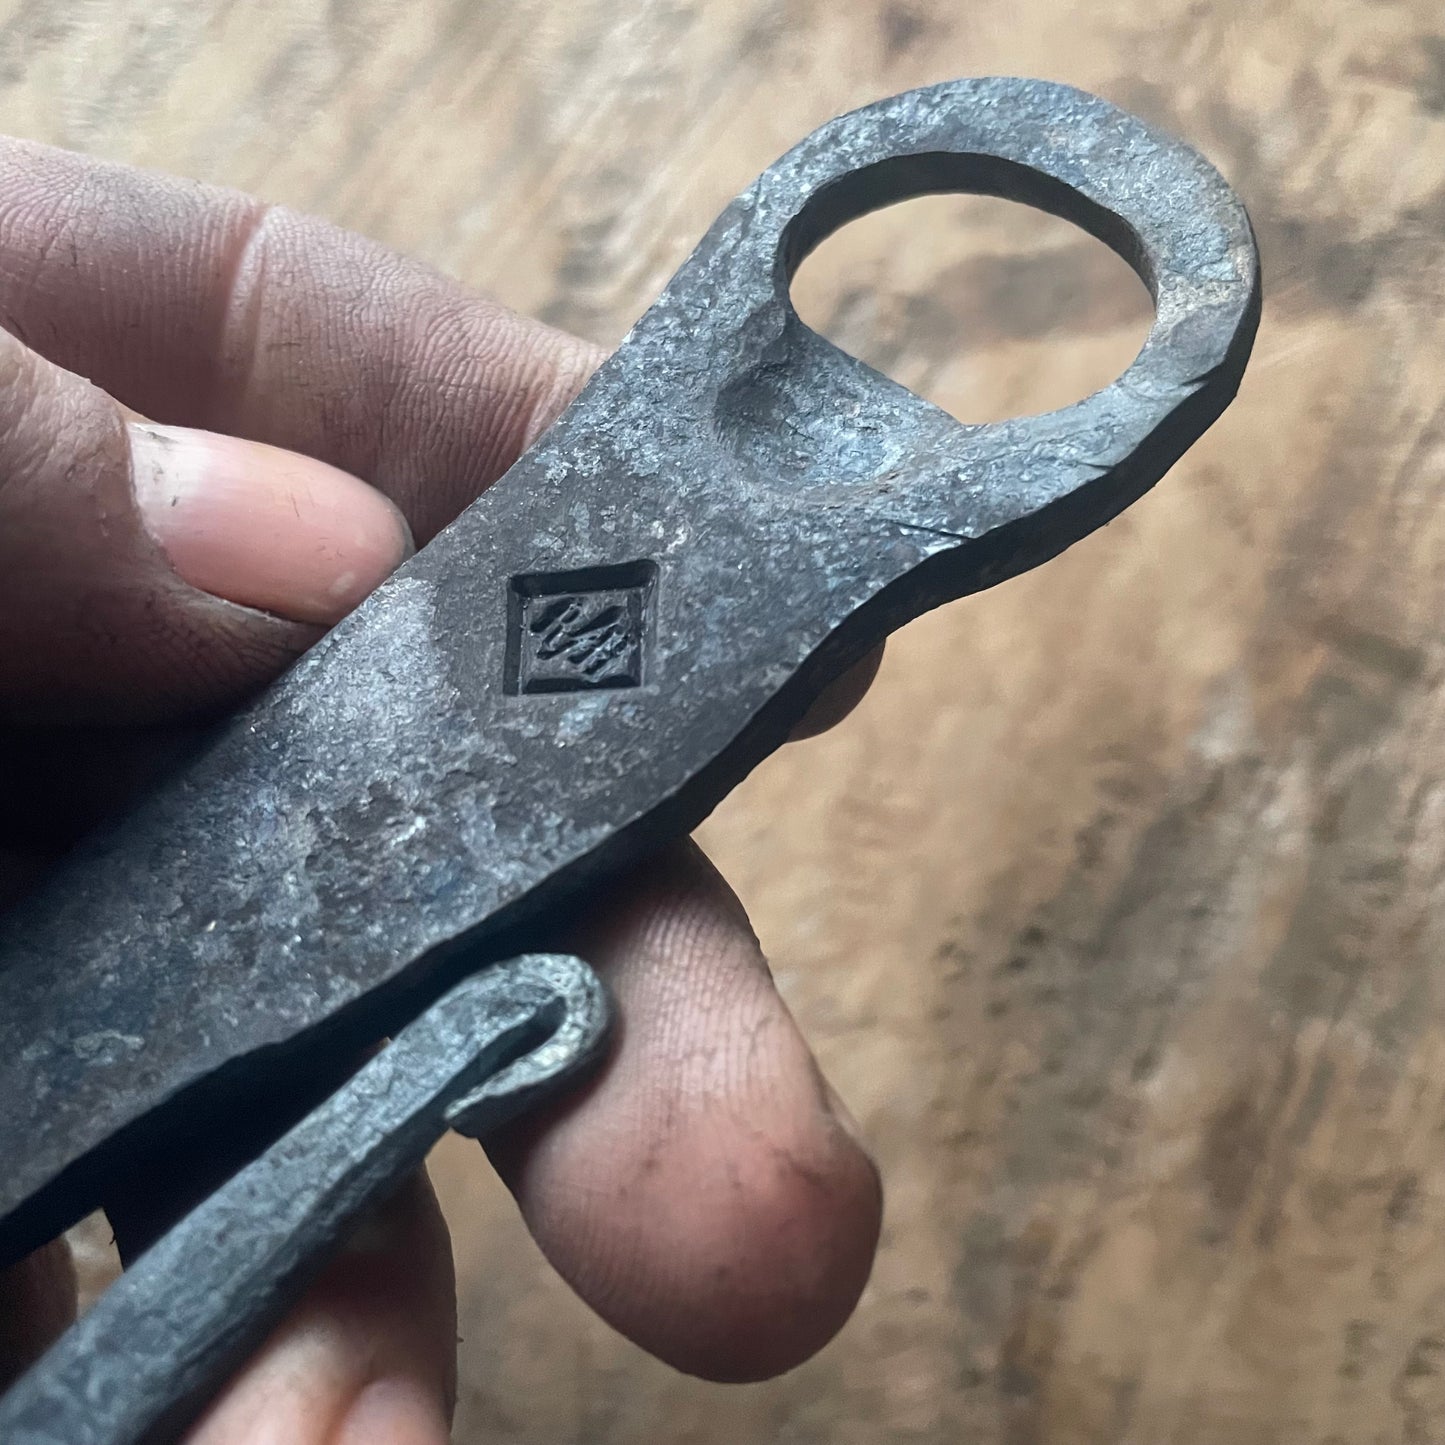 Hand Forged Bottle Opener